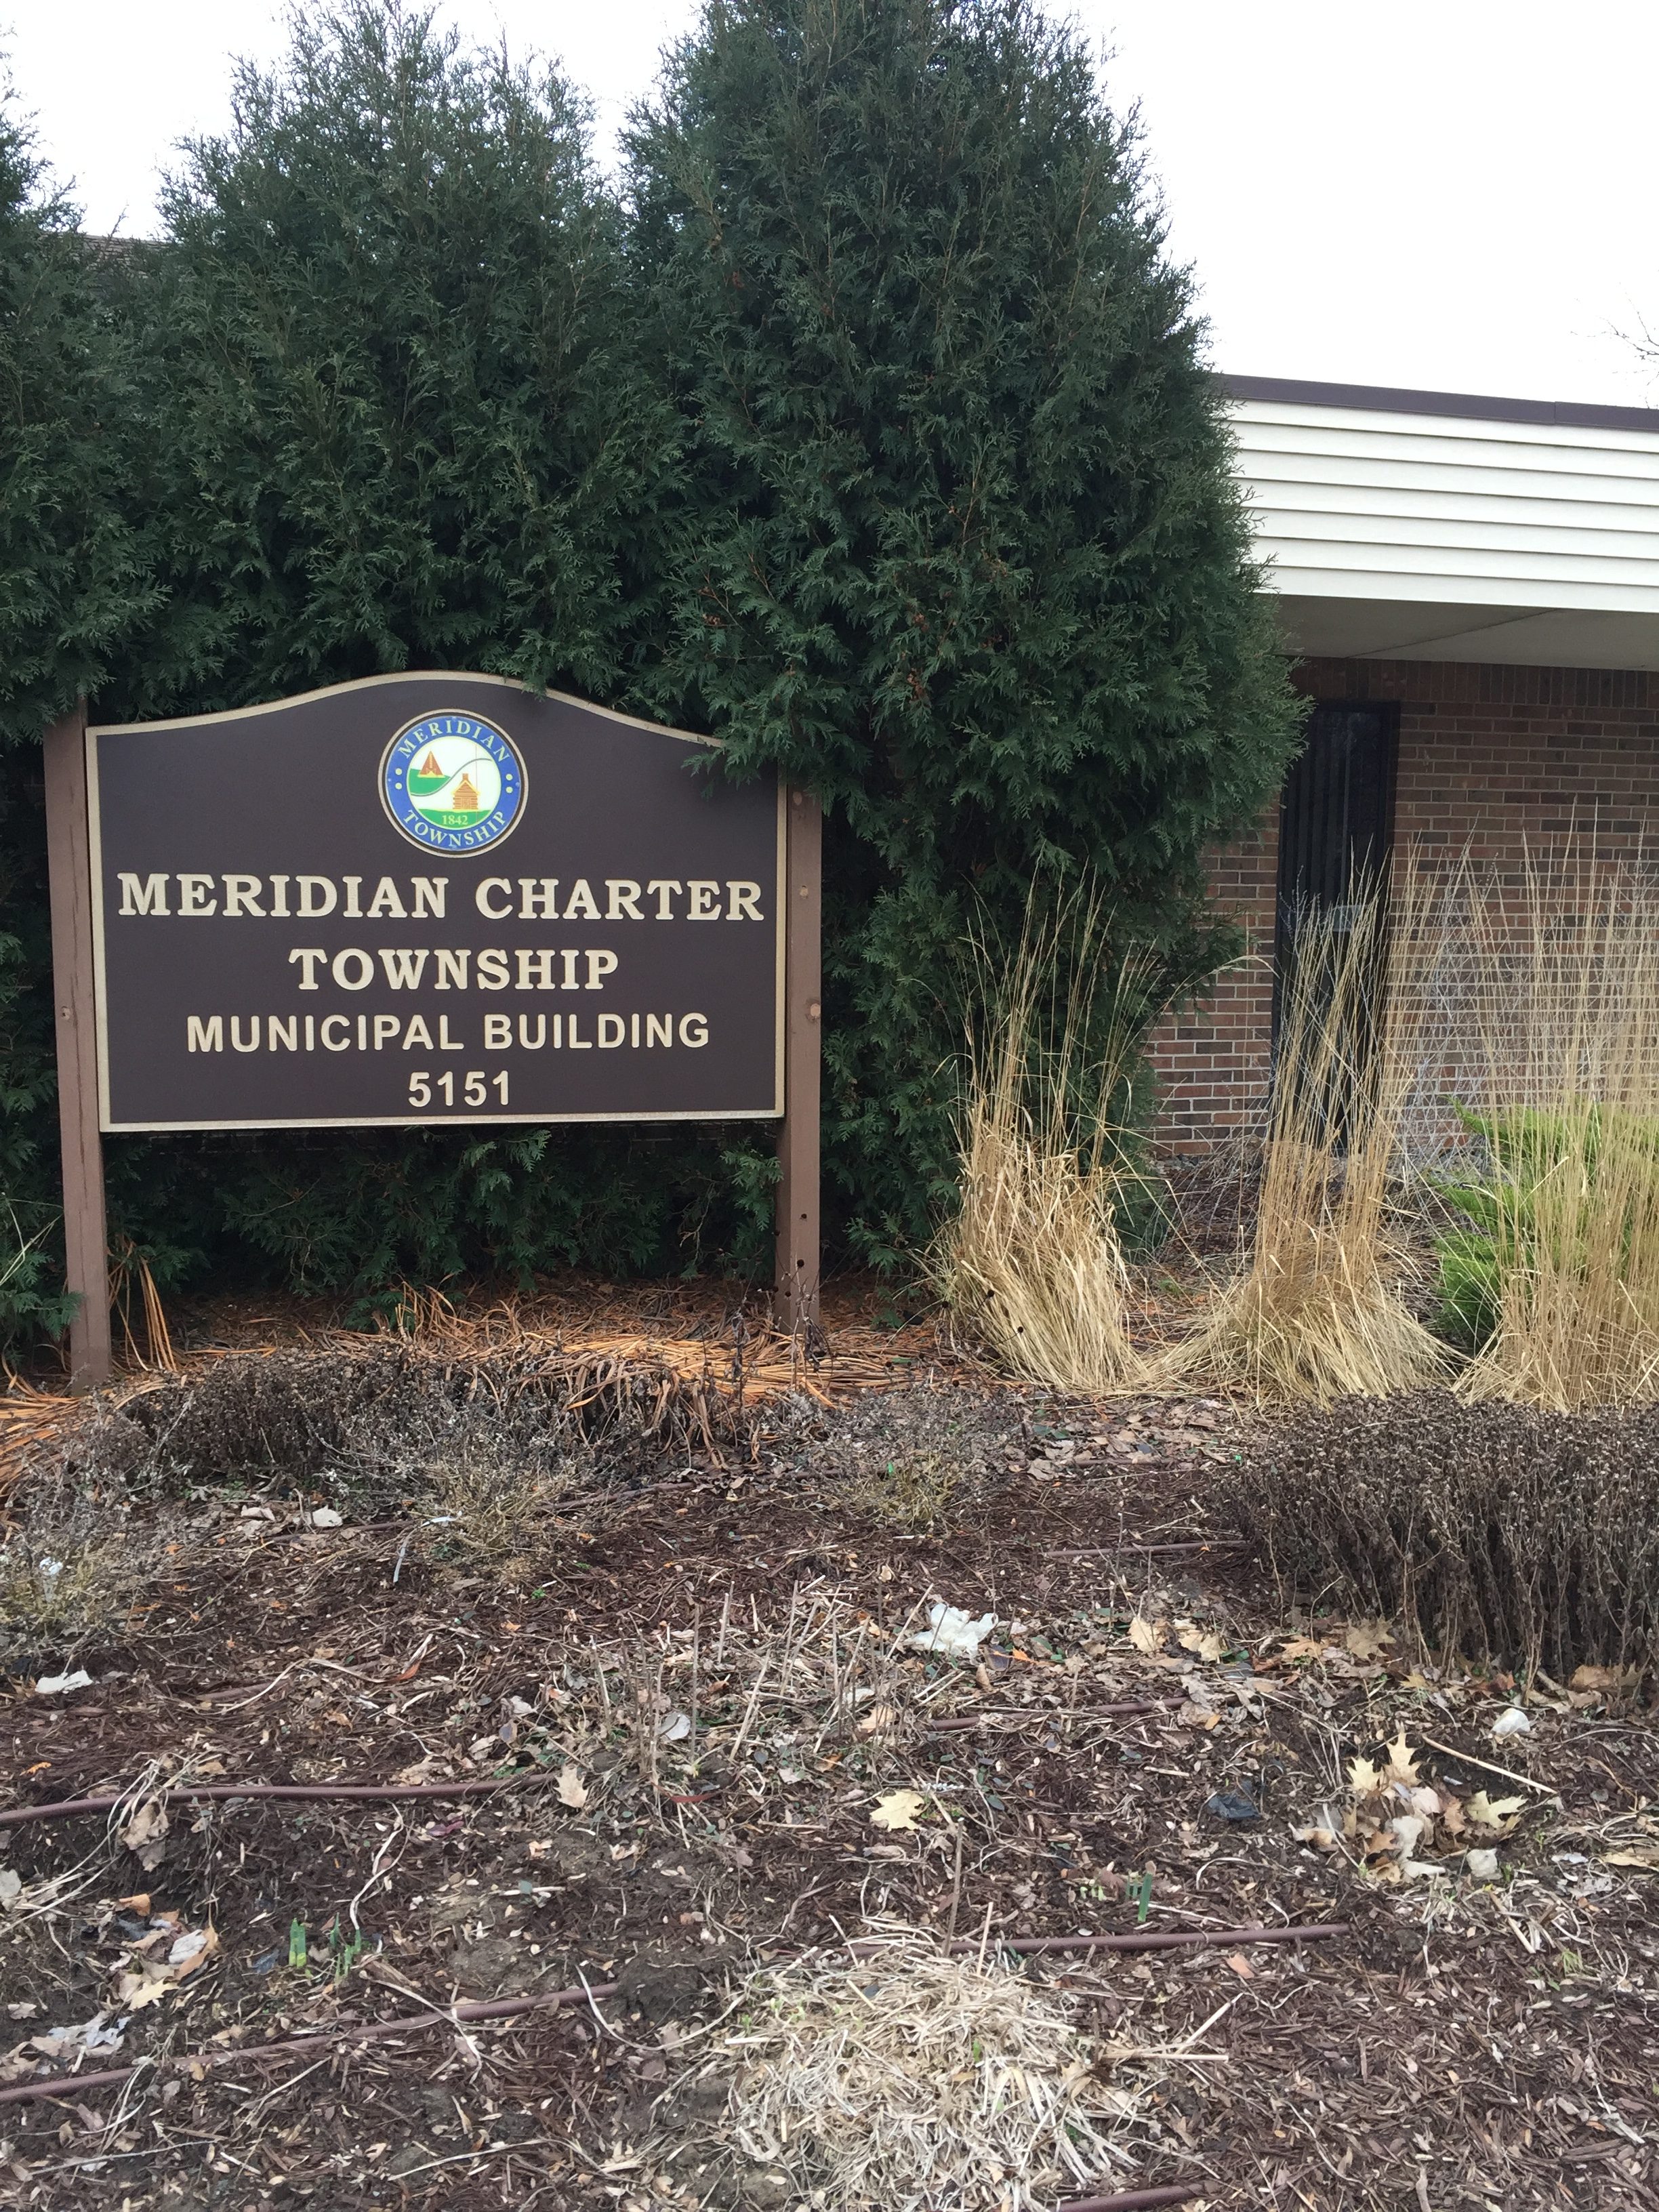 Meridian Township will be celebrating their 175th anniversary by hosting the event, Pancake Breakfast.